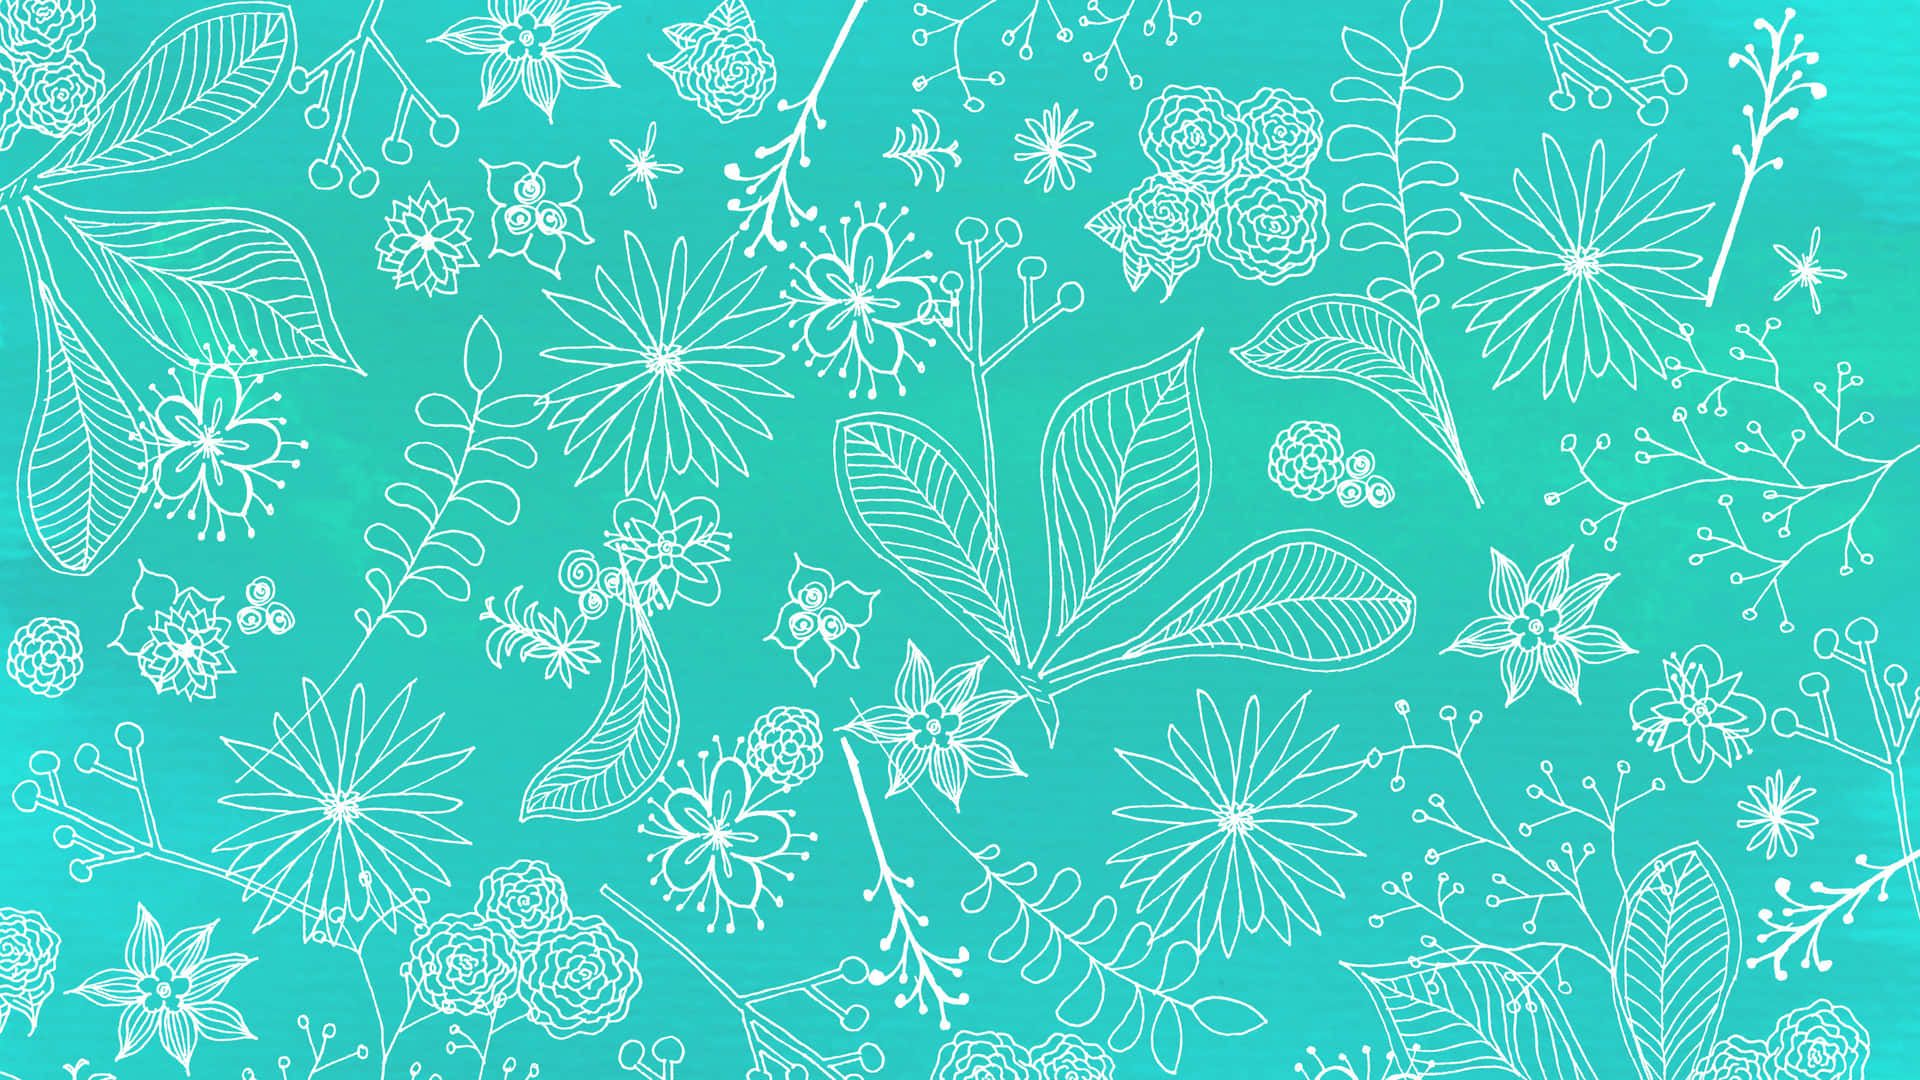 Turquoise background with white flowers and leaves - Turquoise